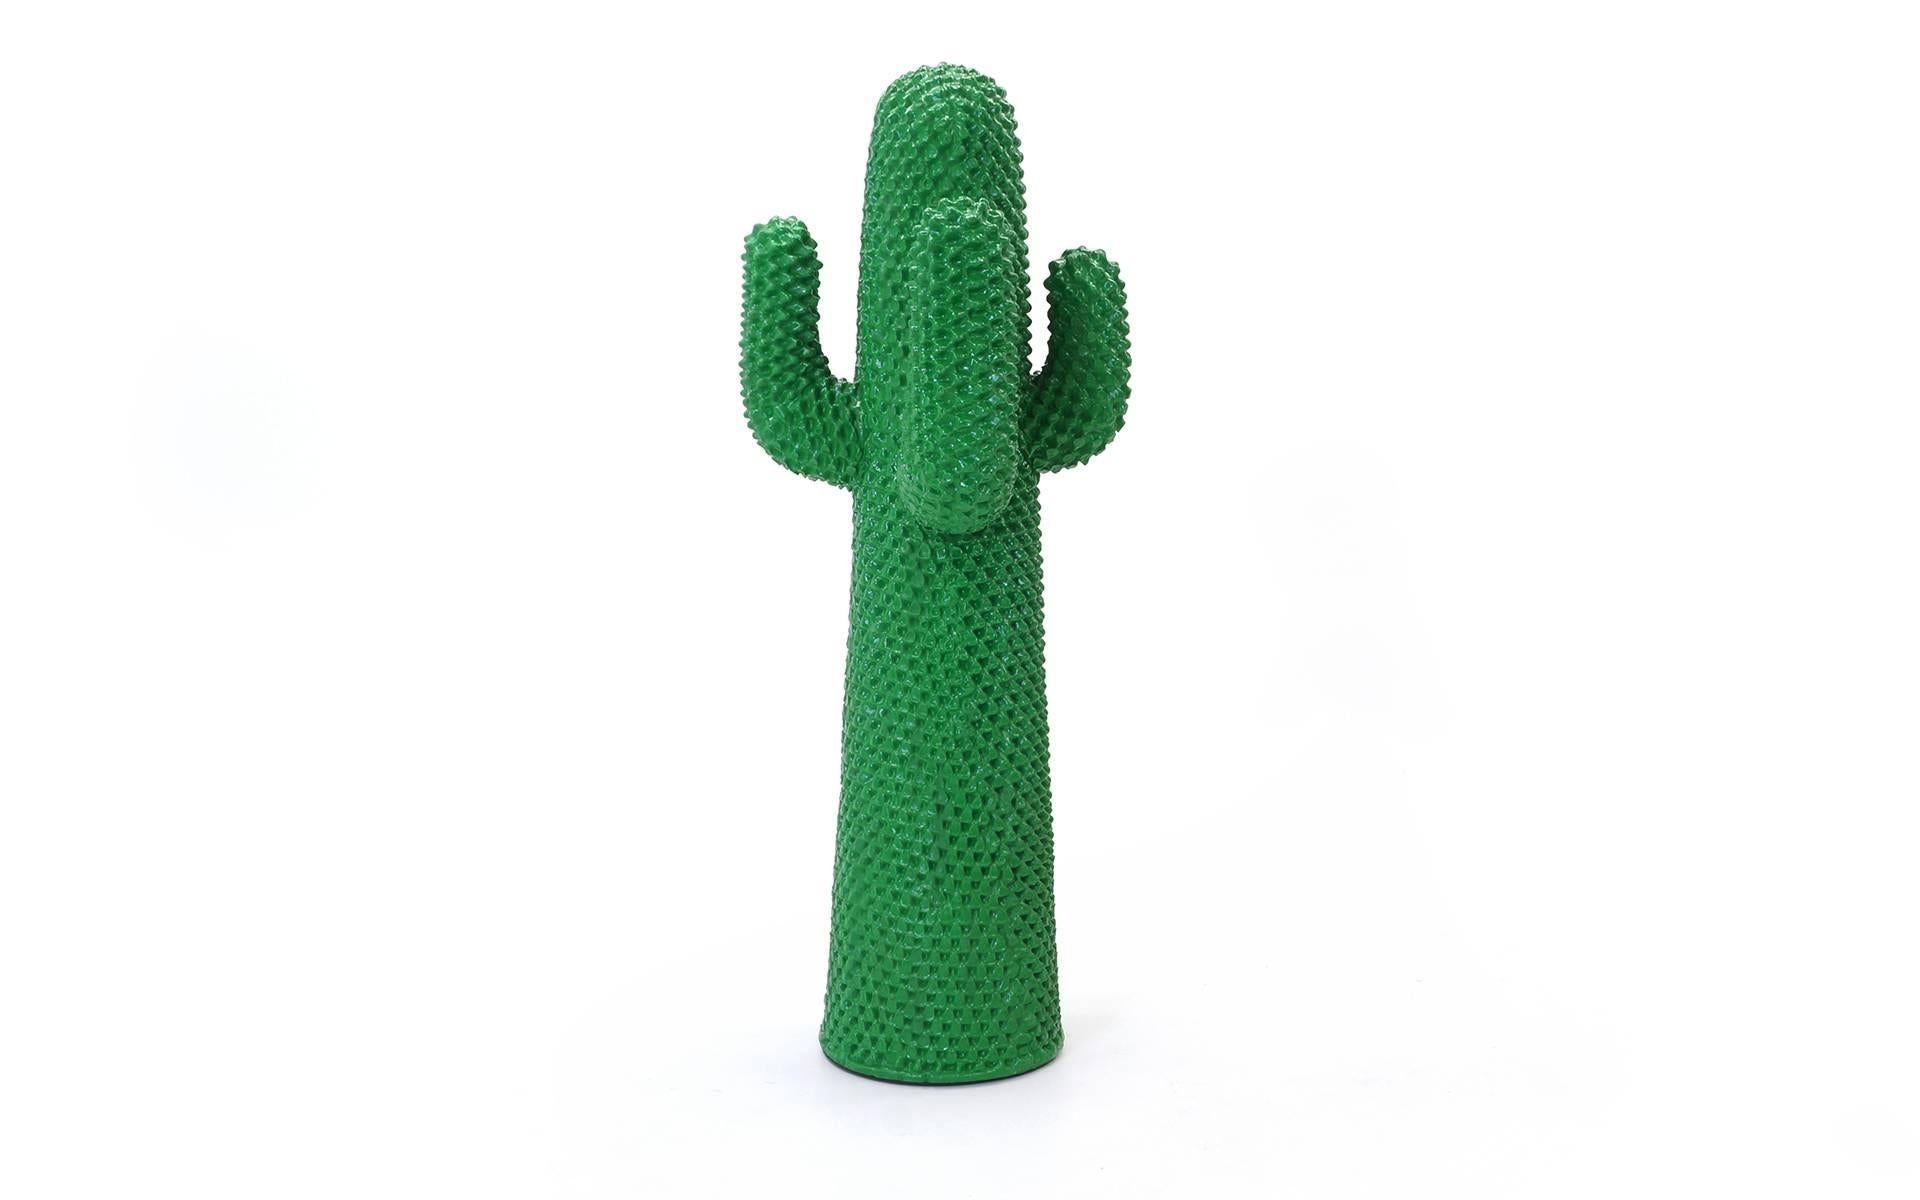 Rare, iconic Cactus coat rack in very good original condition. Signed #936/2000 Gufram Multiples. Polyurethane, green lacquered 'Guflac' finish.
Literature: Design of the 20th century, Fiell, p38. In the collection of: The Museum of Modern Art, New